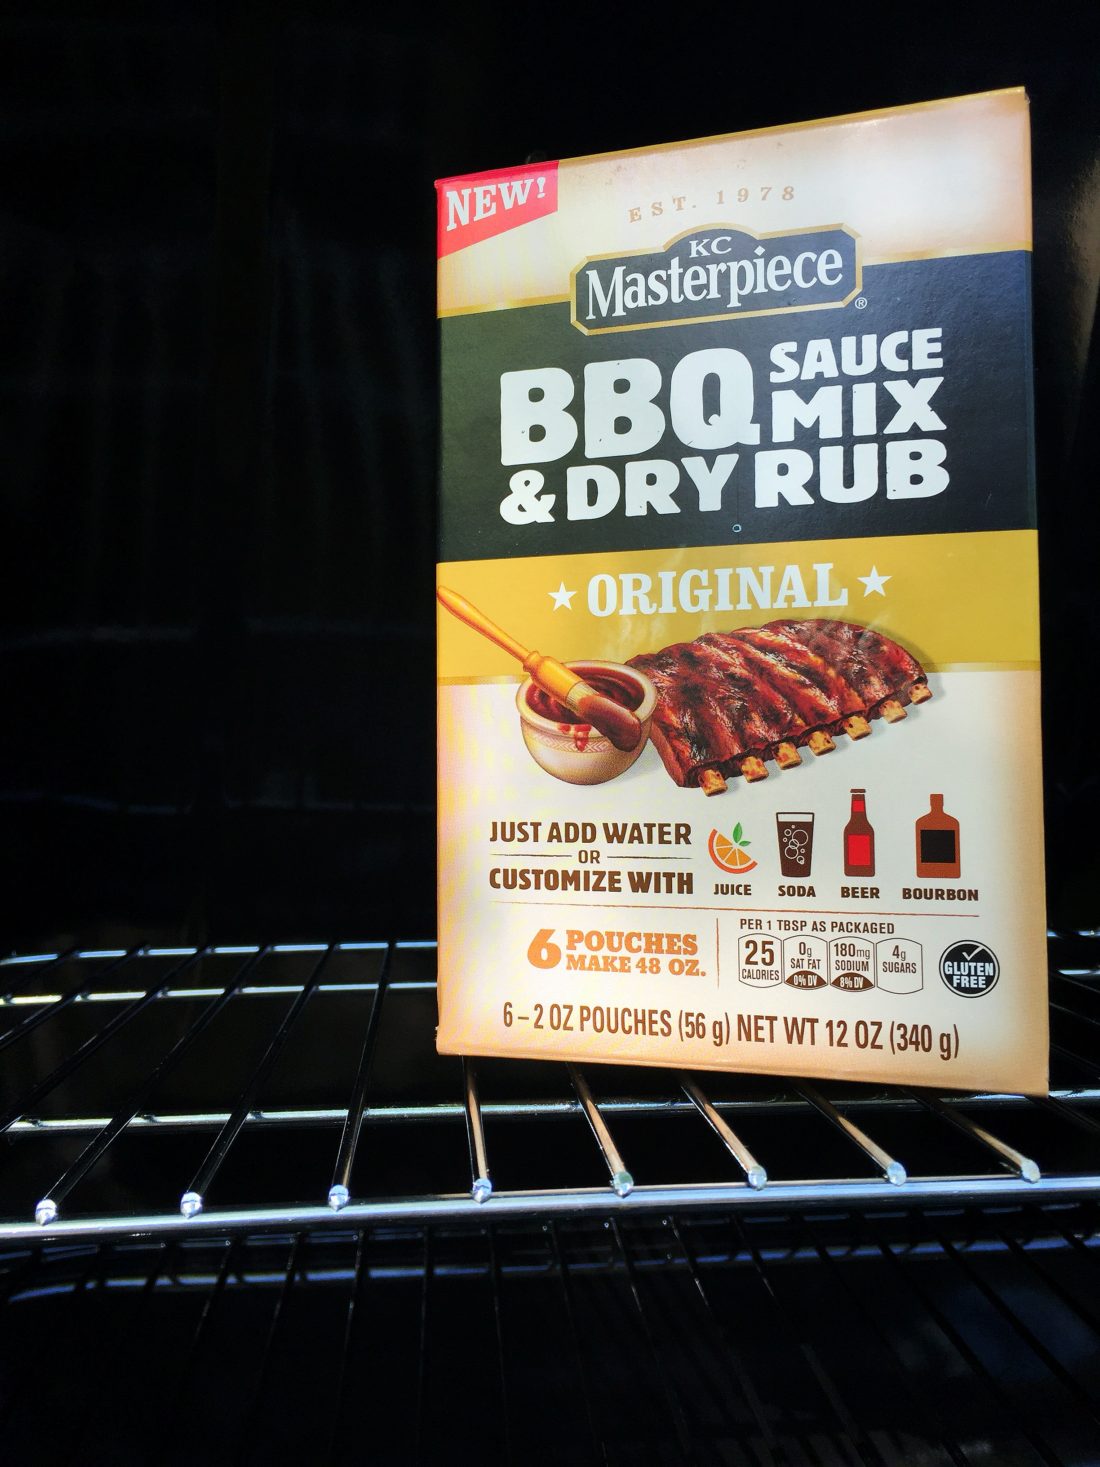 Grill Recipe With Bacon Cheddar Burgers And Coffee BBQ Sauce © www.roastedbeanz.com #BestSummerBBQ [AD] #CollectiveBias #shop